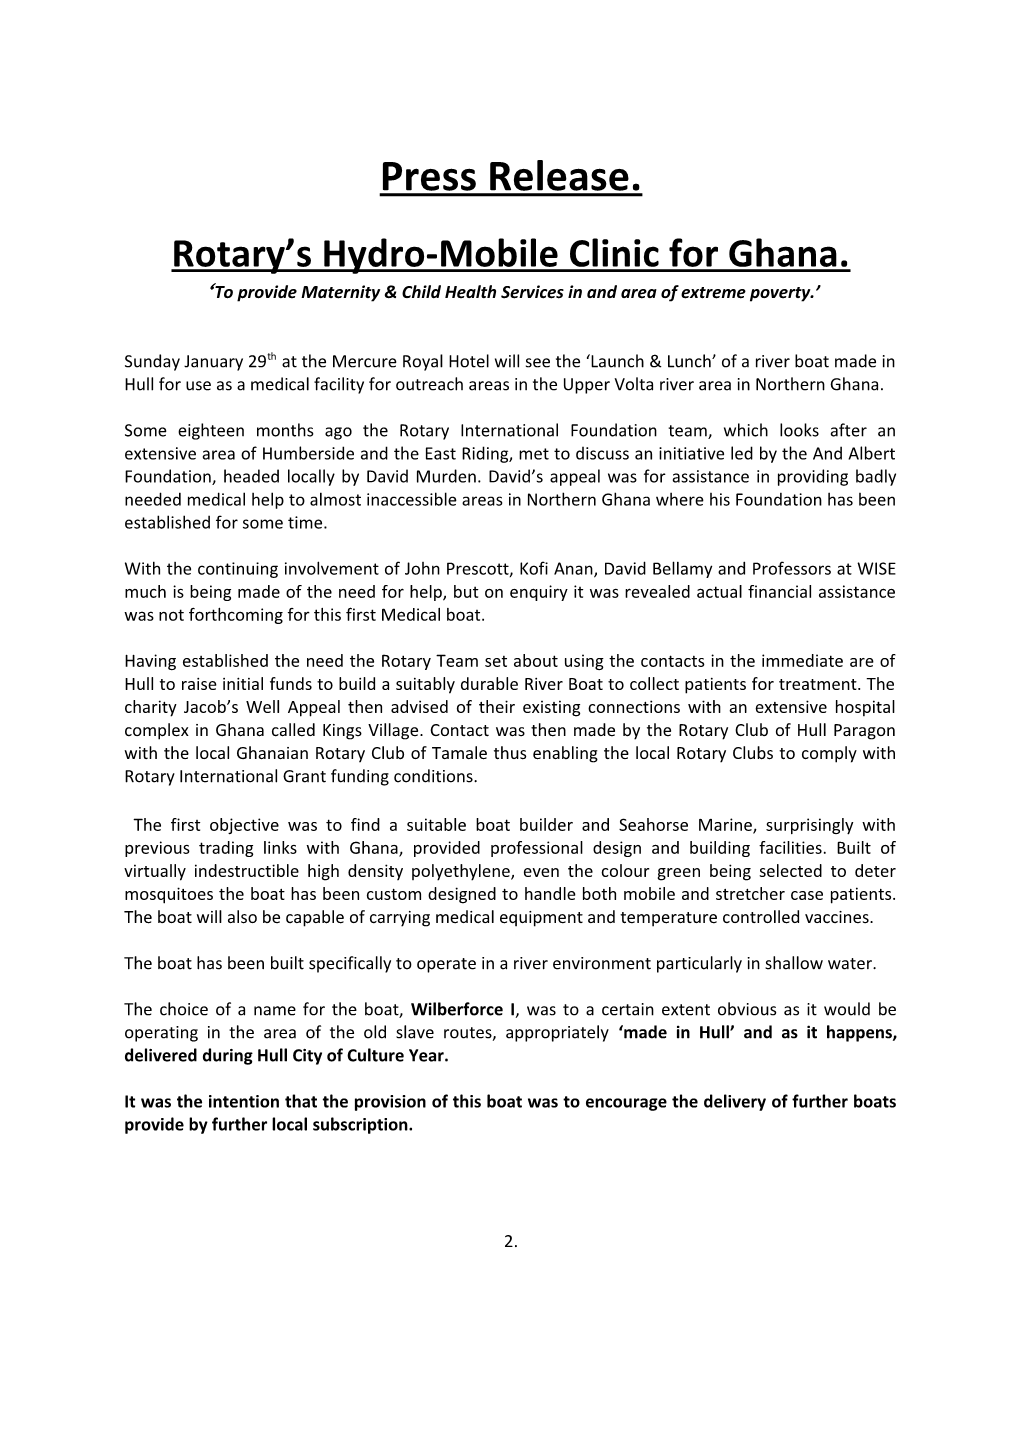 Rotary S Hydro-Mobile Clinic for Ghana